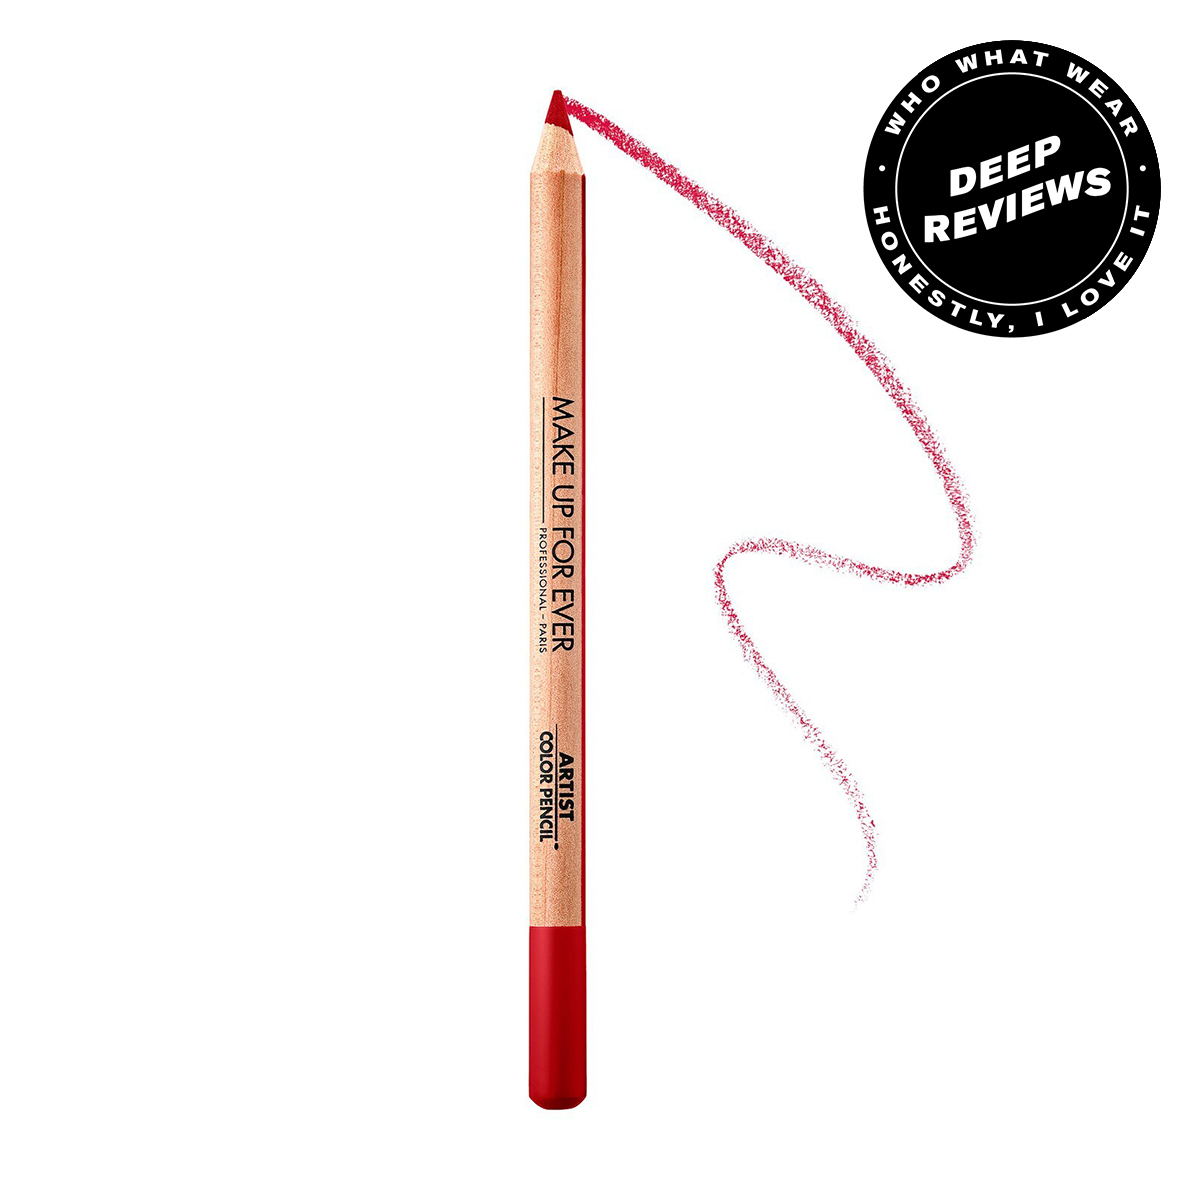 Reviewed: Make Up For Ever's Artist Color Pencil